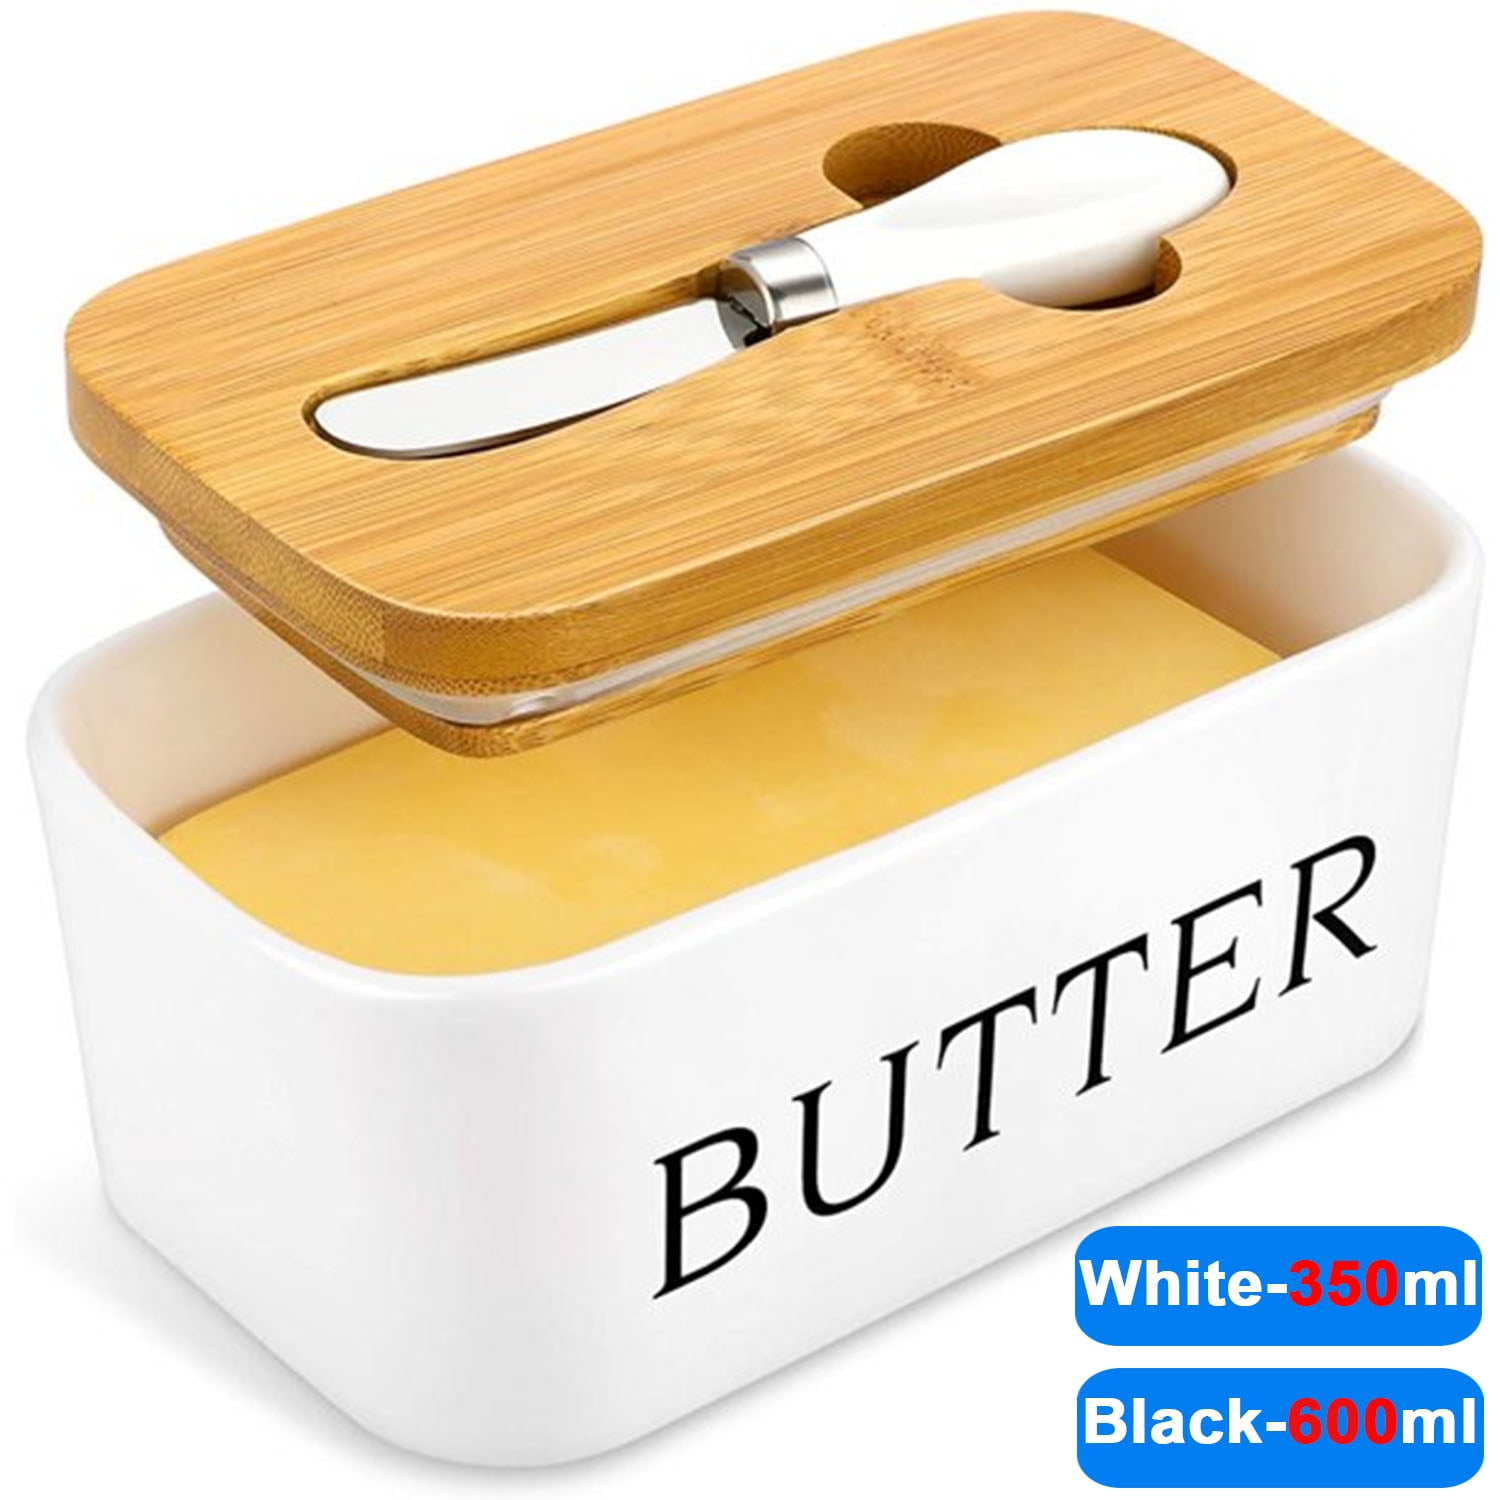 Souswee Porcelain Butter Dish Container with Air-tight Seal Lid